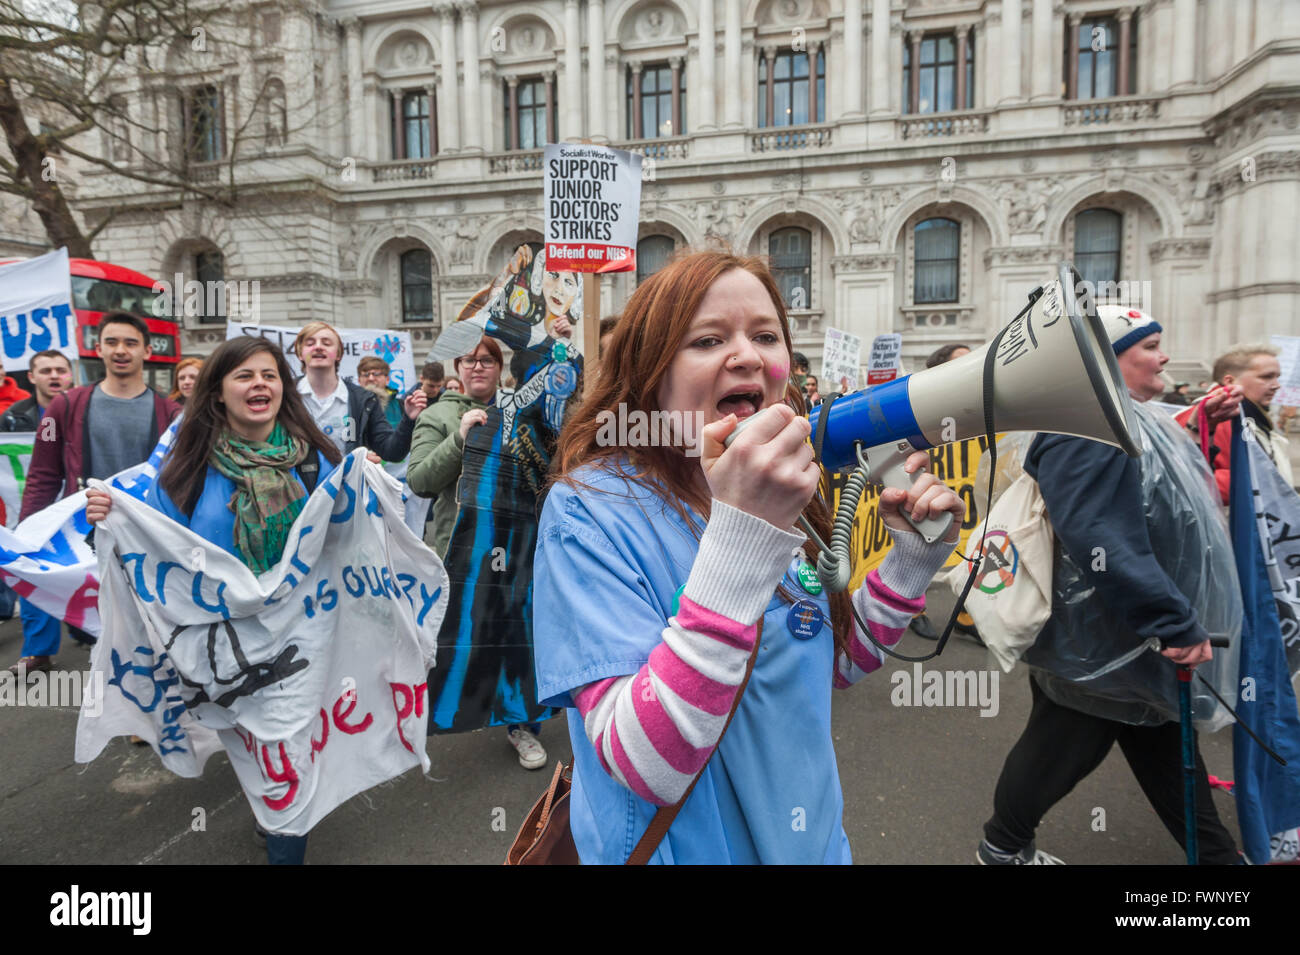 London, UK. 6th April, 2016. Danielle Tiplady, President of King’s College London Nursing and Midwifery Society leads the 'Bursary or Bust' march across Whitehall to the Department of Health, where others are waiting for them. NHS students need bursaries as their long hours of study and placements prevent them taking part-time jobs; they deserve them because their placements involve real work in hospitals and are a vital source of labour for the NHS. Peter Marshall/Alamy Live News Stock Photo